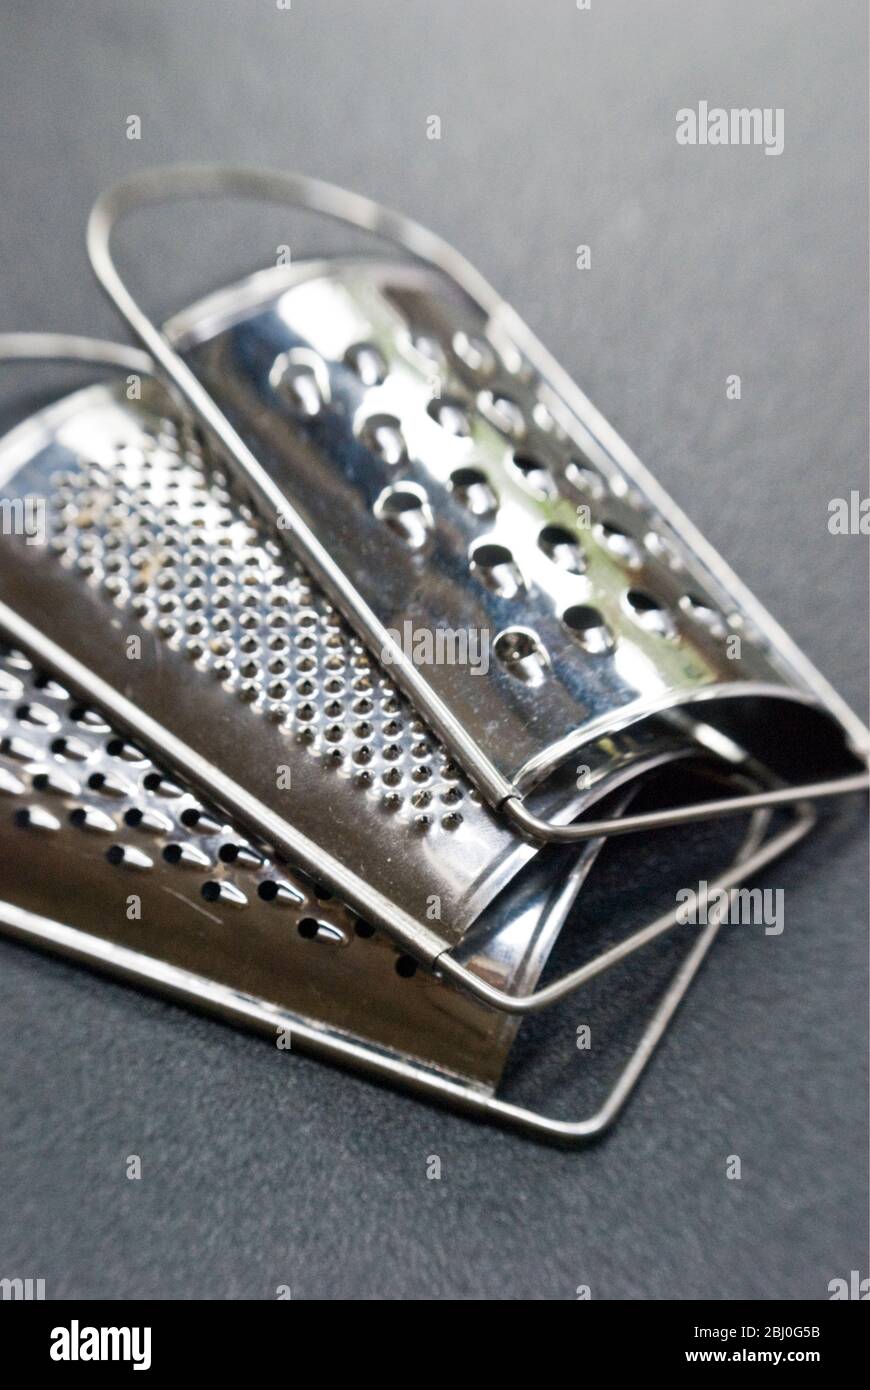 Set of three small graters, with different size holes - Stock Photo